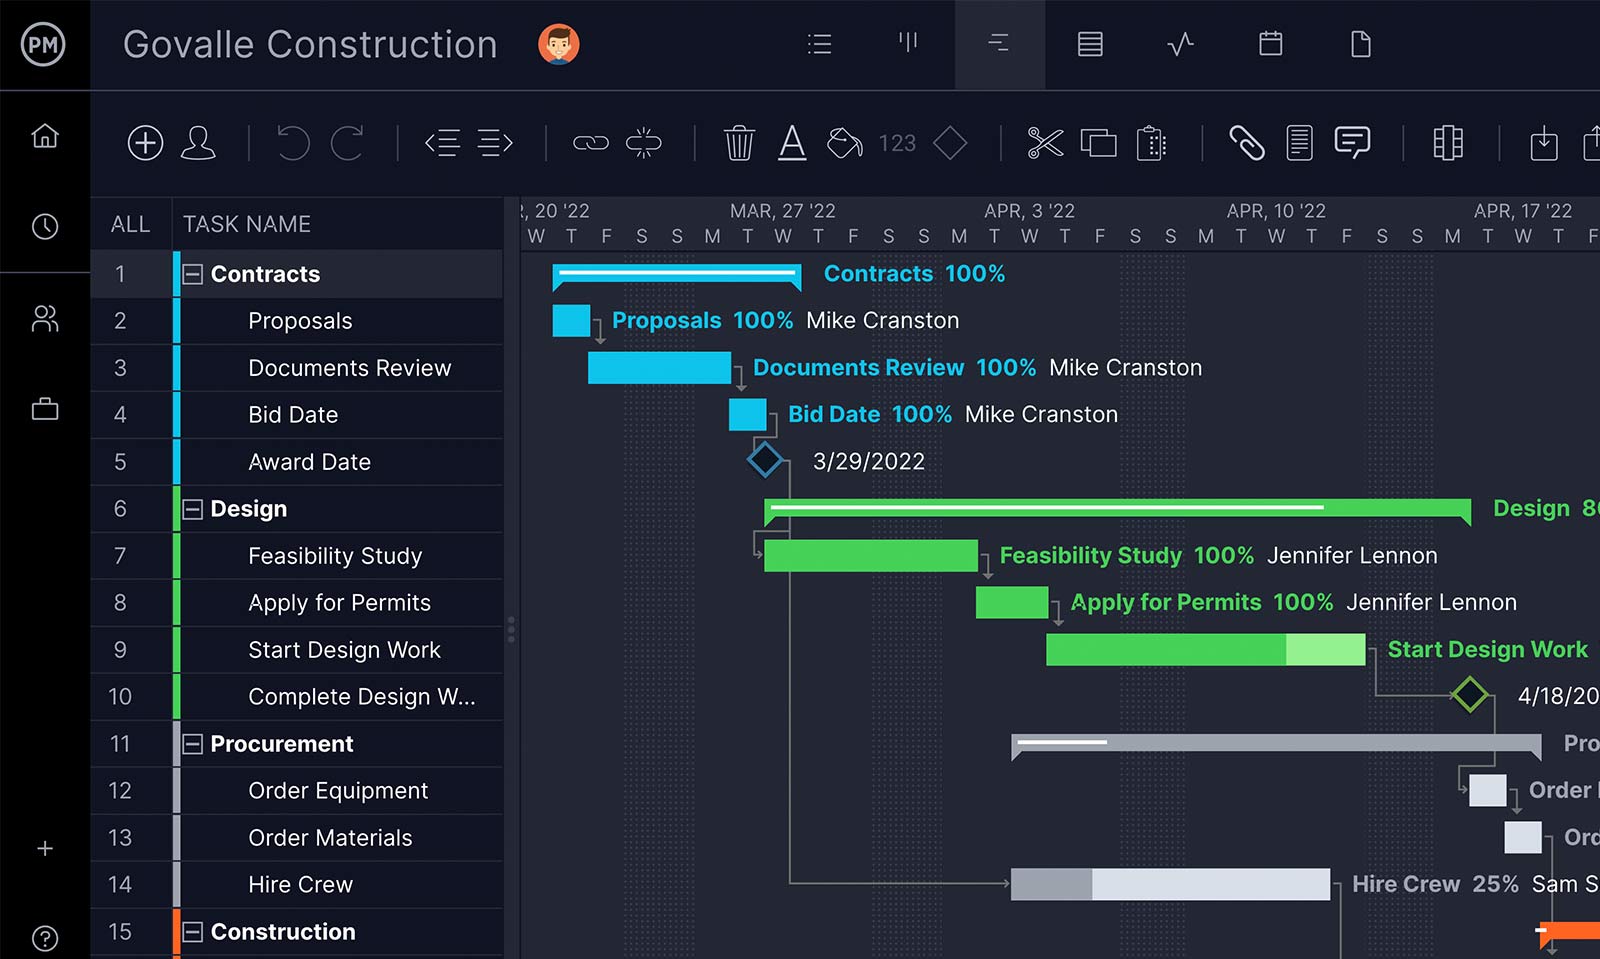 ProjectManager is a construction project management software with online Gantt charts